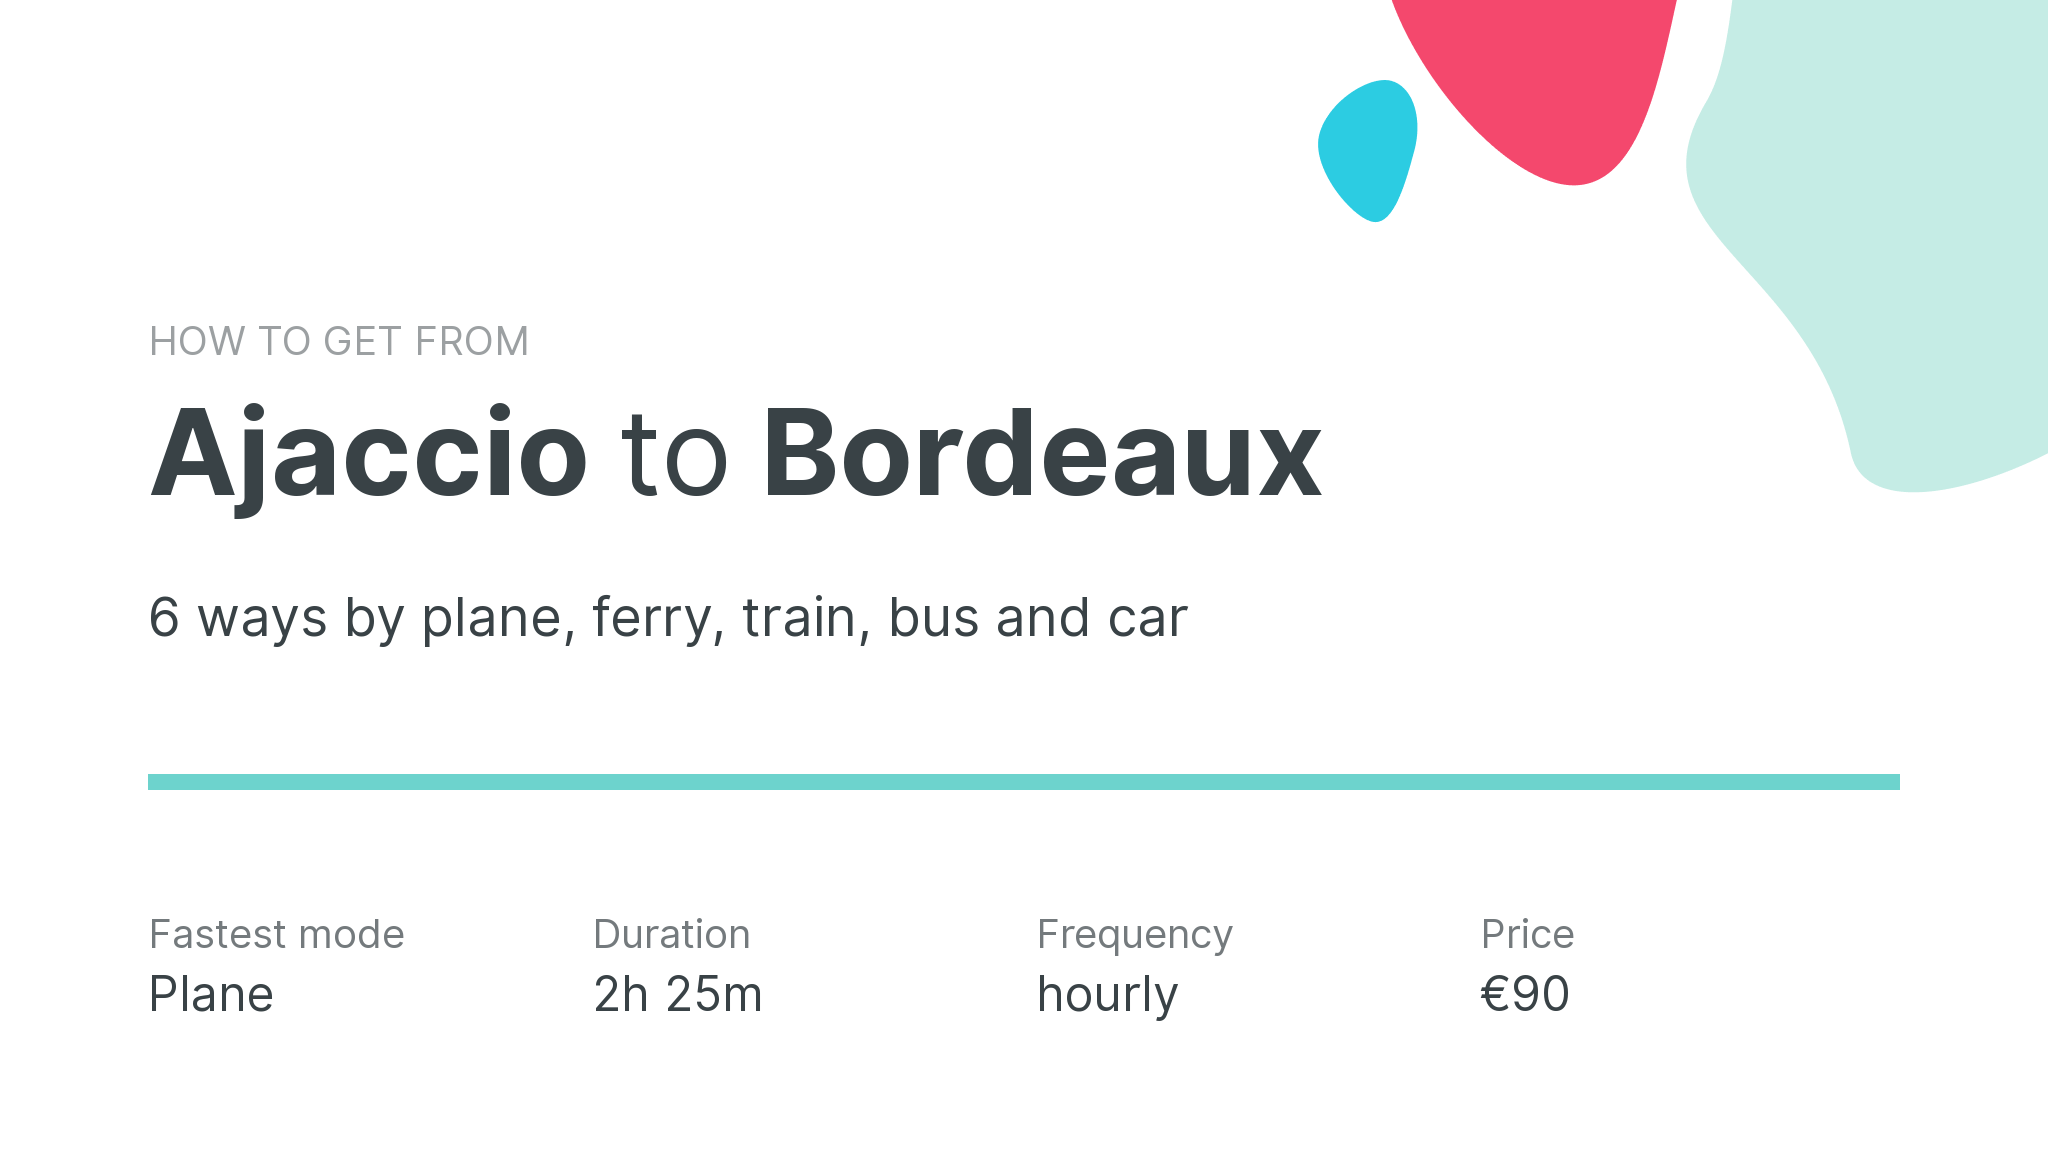 How do I get from Ajaccio to Bordeaux